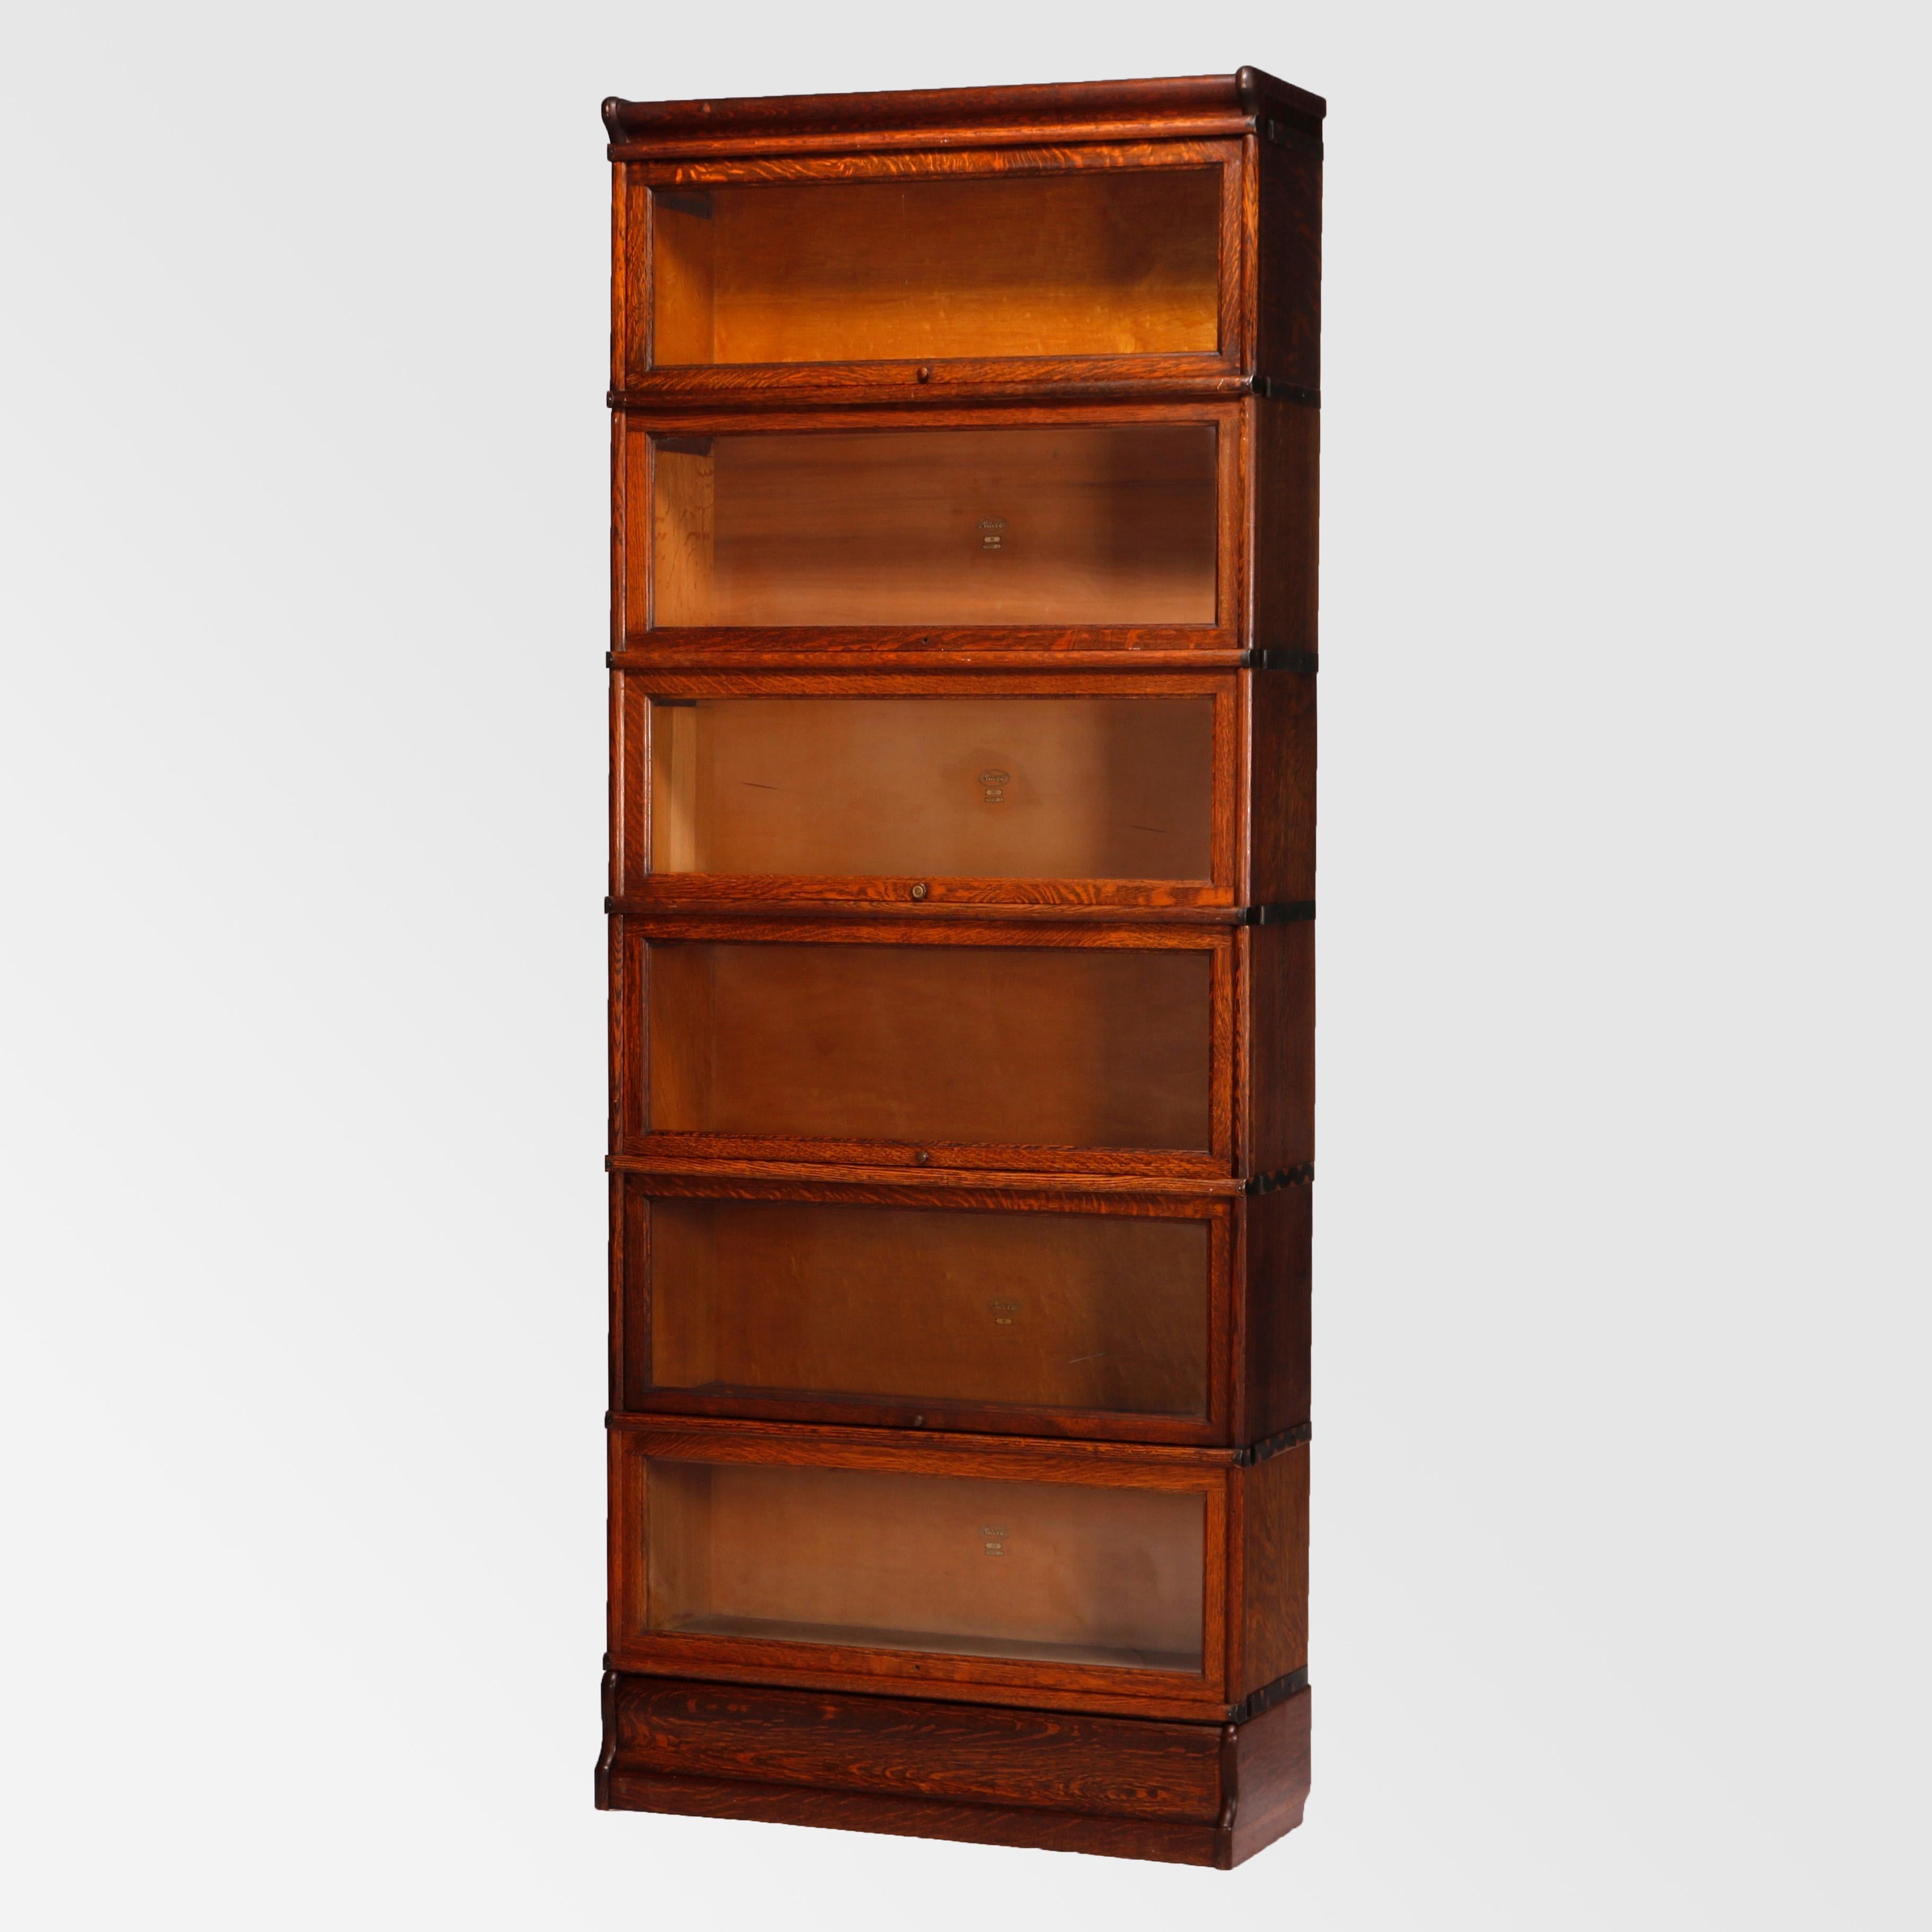 An antique Arts & Crafts Barrister bookcase by Macey offers oak construction with six stacks, each having pull out glass doors and seated on ogee base, maker label as photographed, c1910

Measures - 86'' H x 34.25'' W x 12.5'' D.

Catalogue Note: